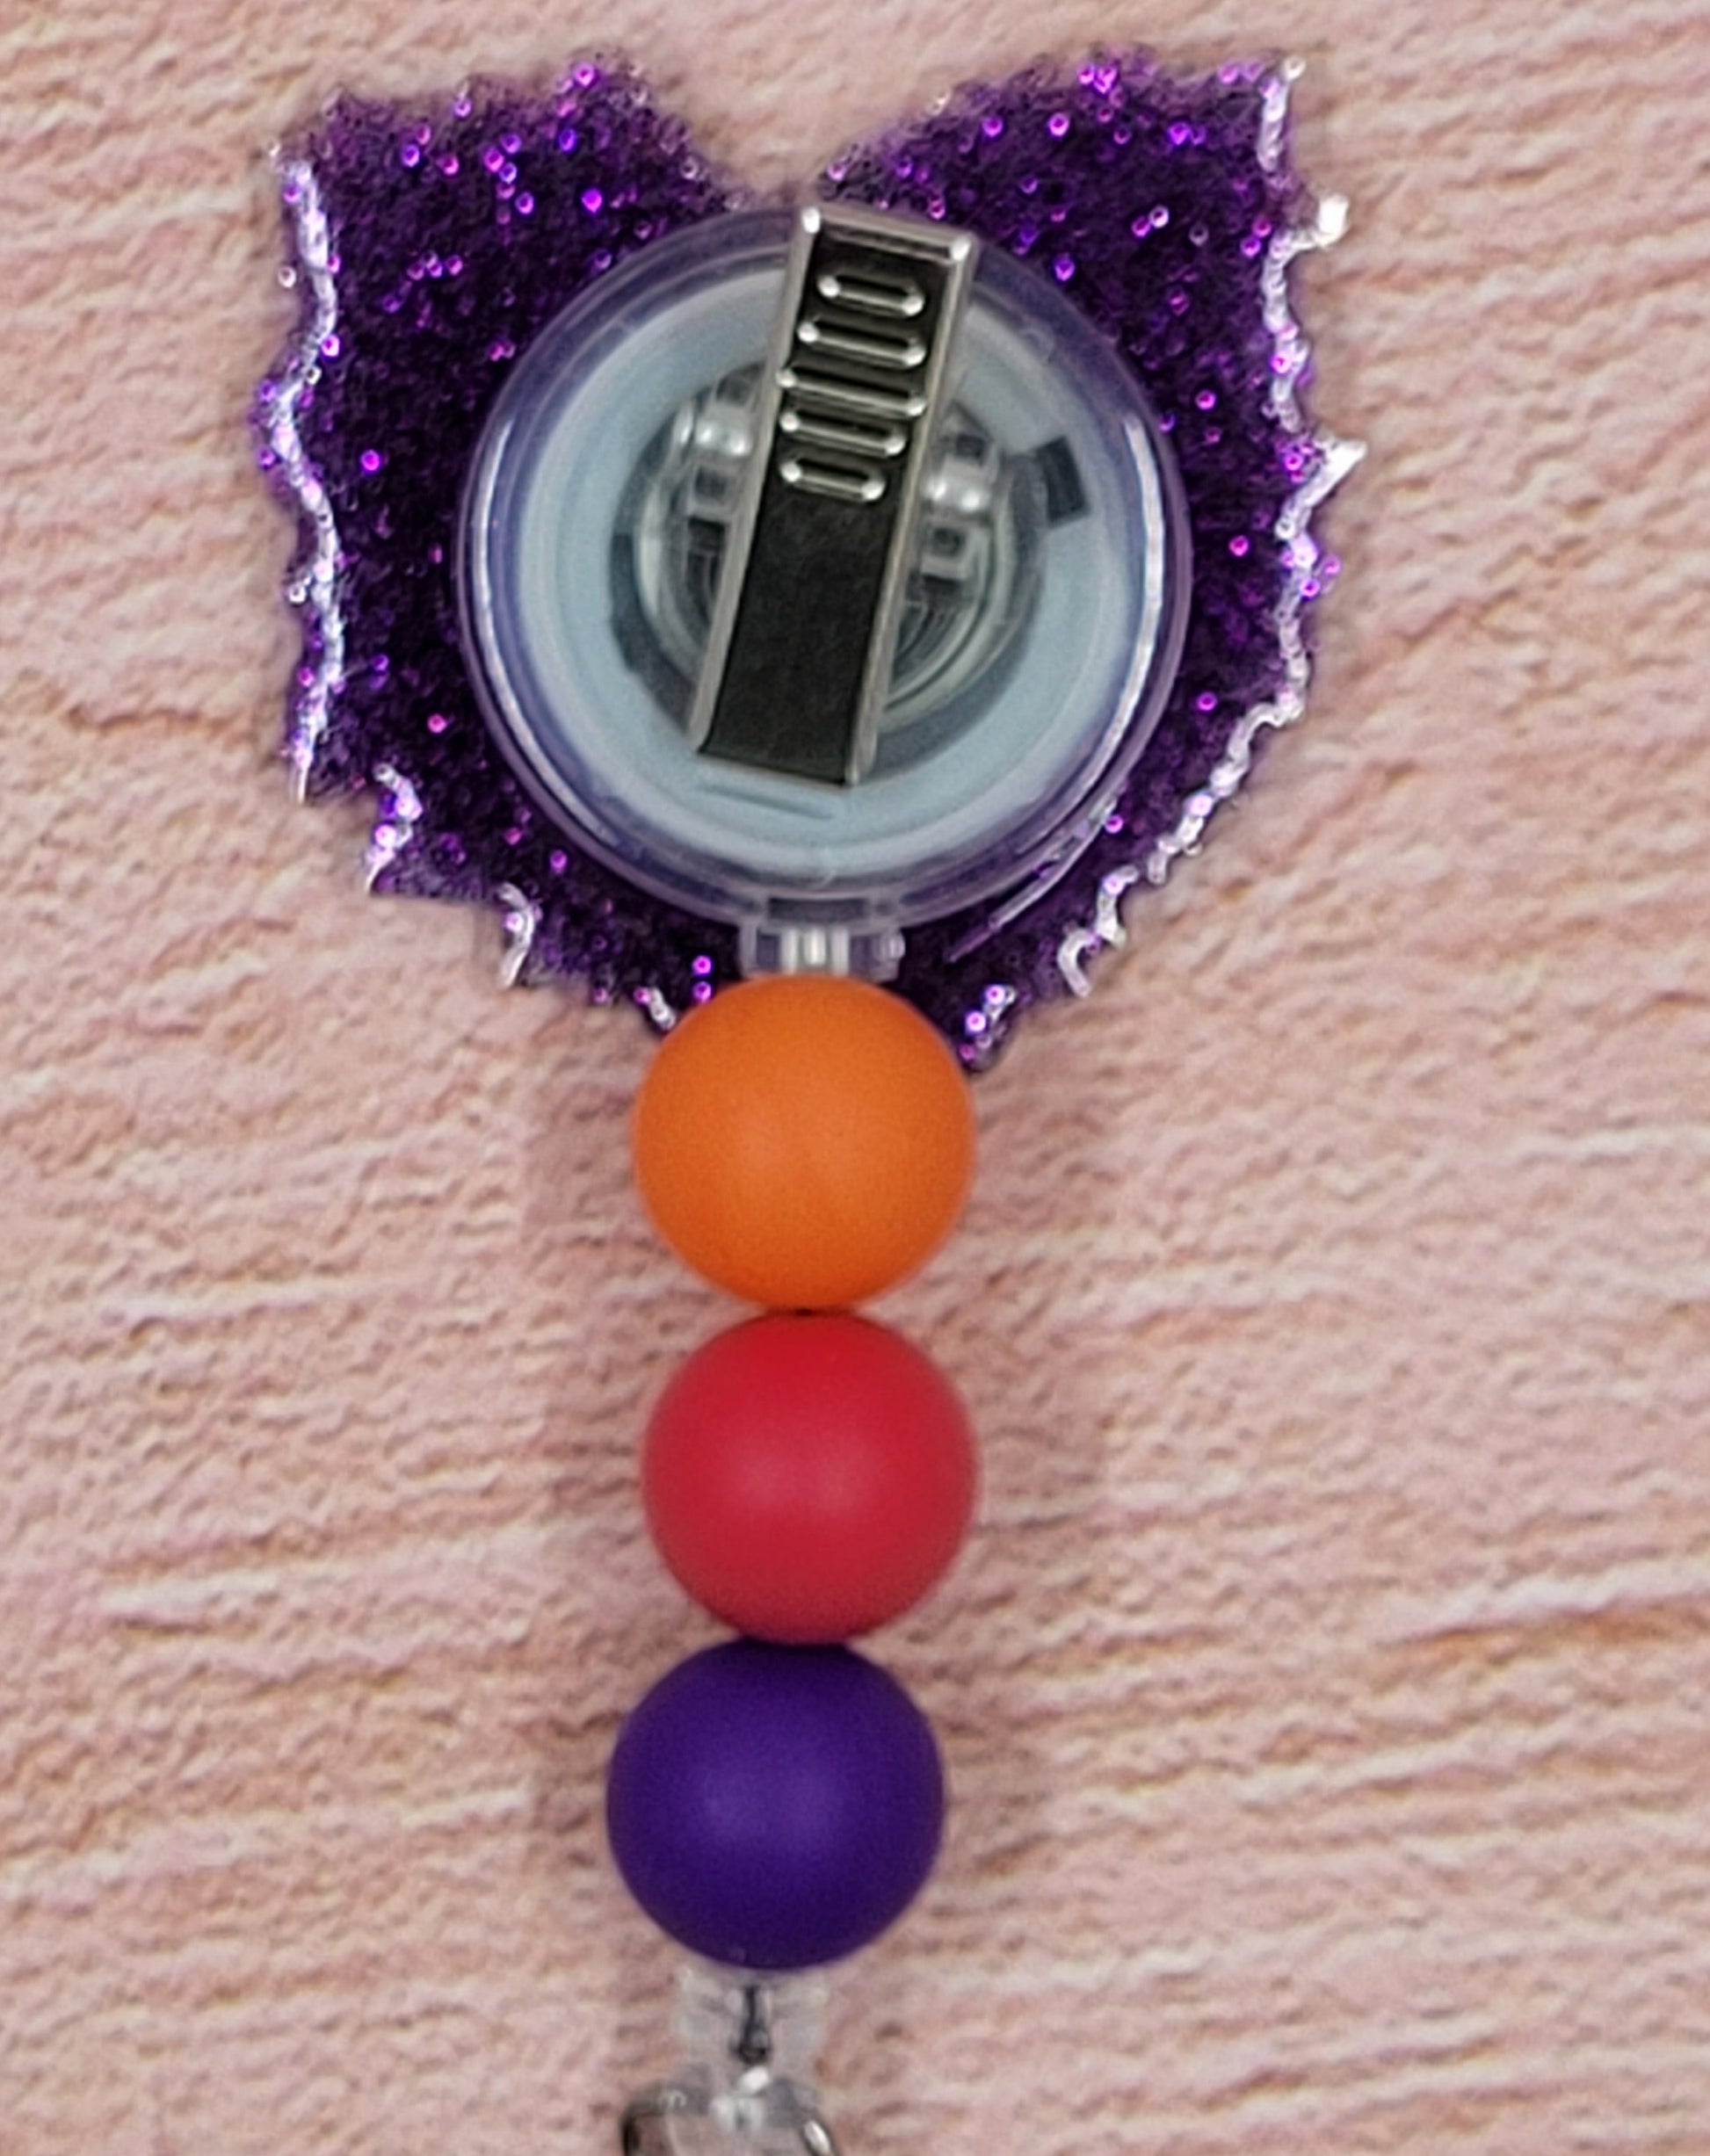 This Badge Reel utilizes an attractive floral pattern in a bold color palette. The design is complemented by a purple glitter base and three coordinated silicone beads.